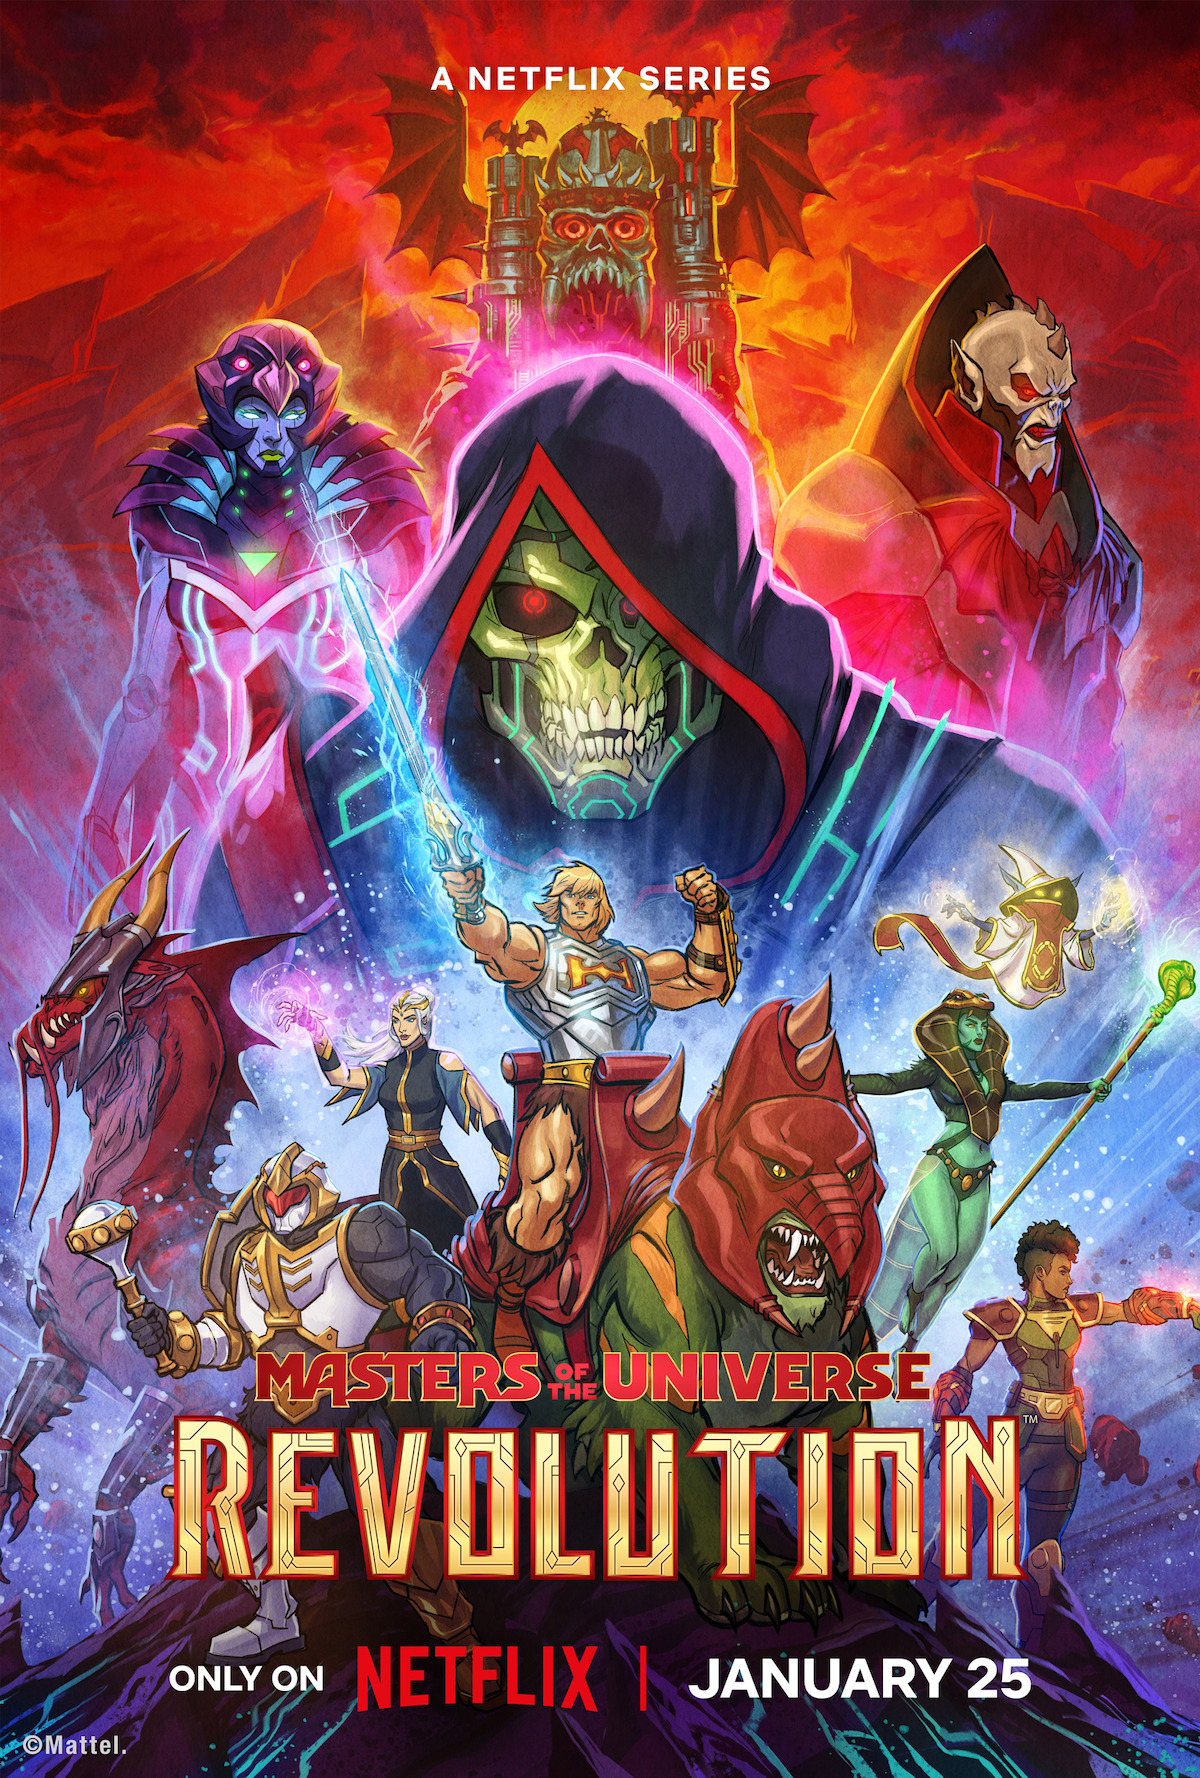 'Masters of the Universe Revolution' Release date, trailer, cast